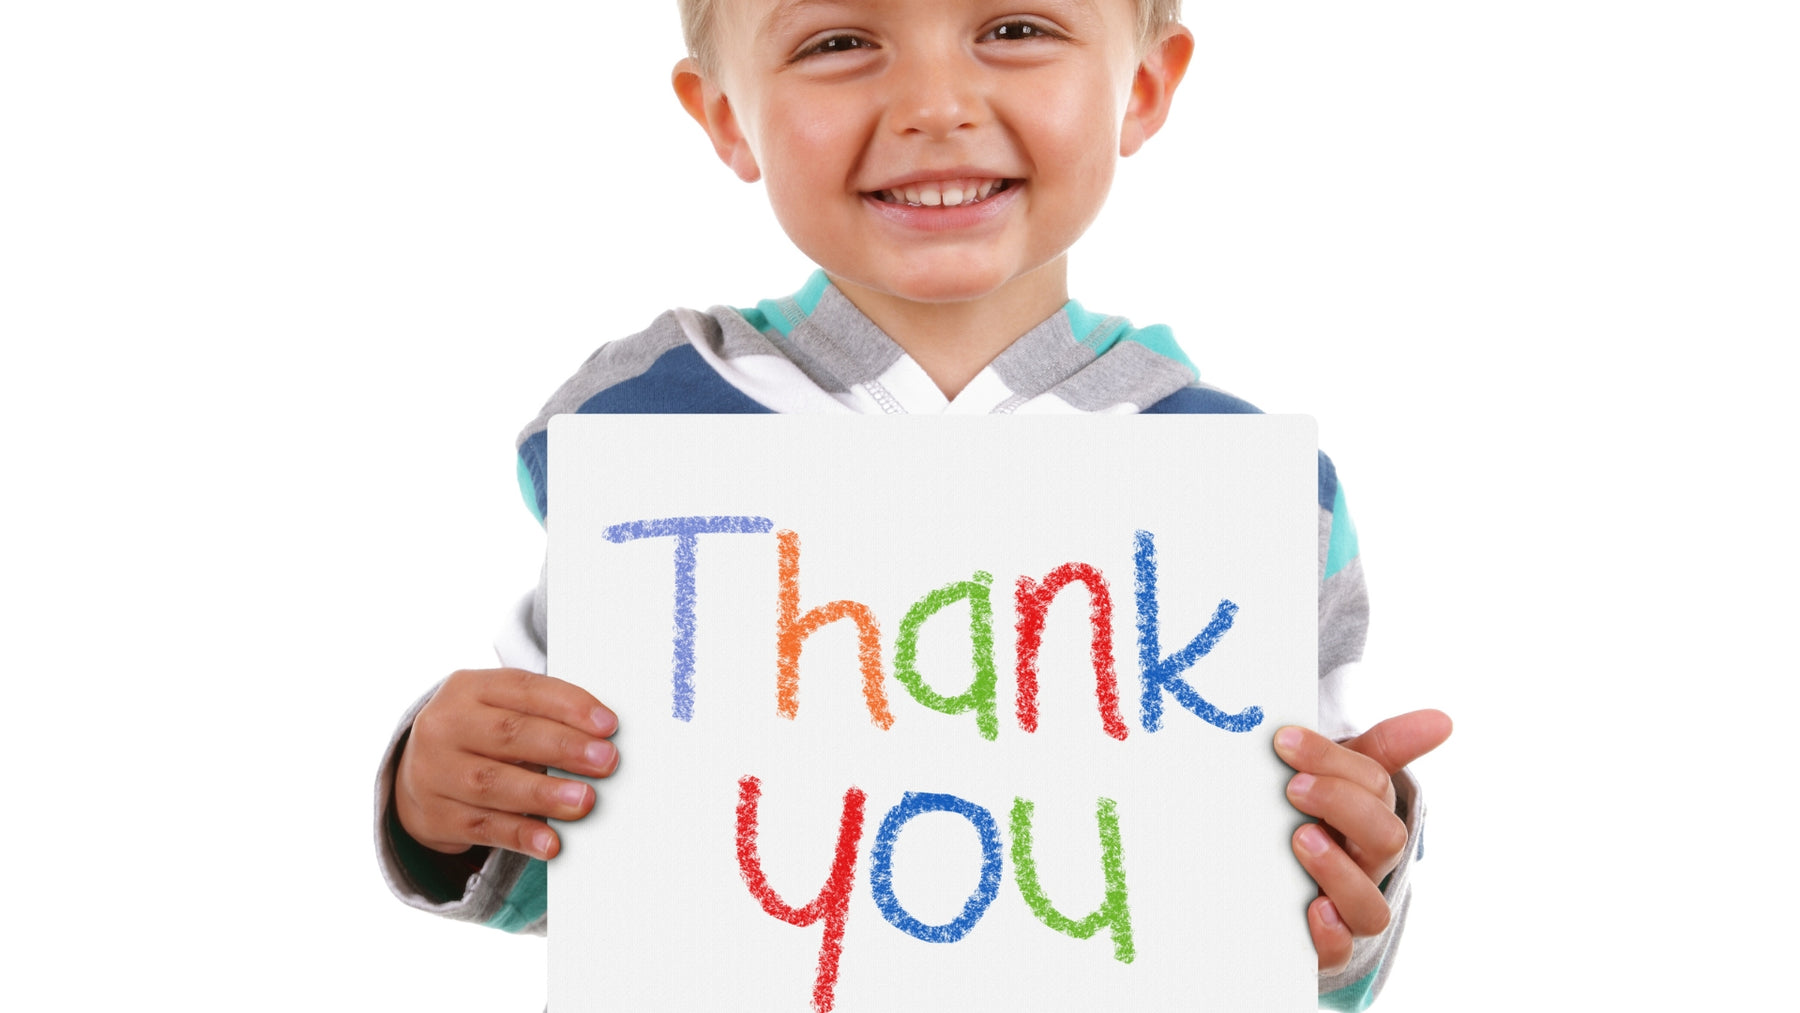 Ways to Cultivate an Attitude of Gratitude in Children